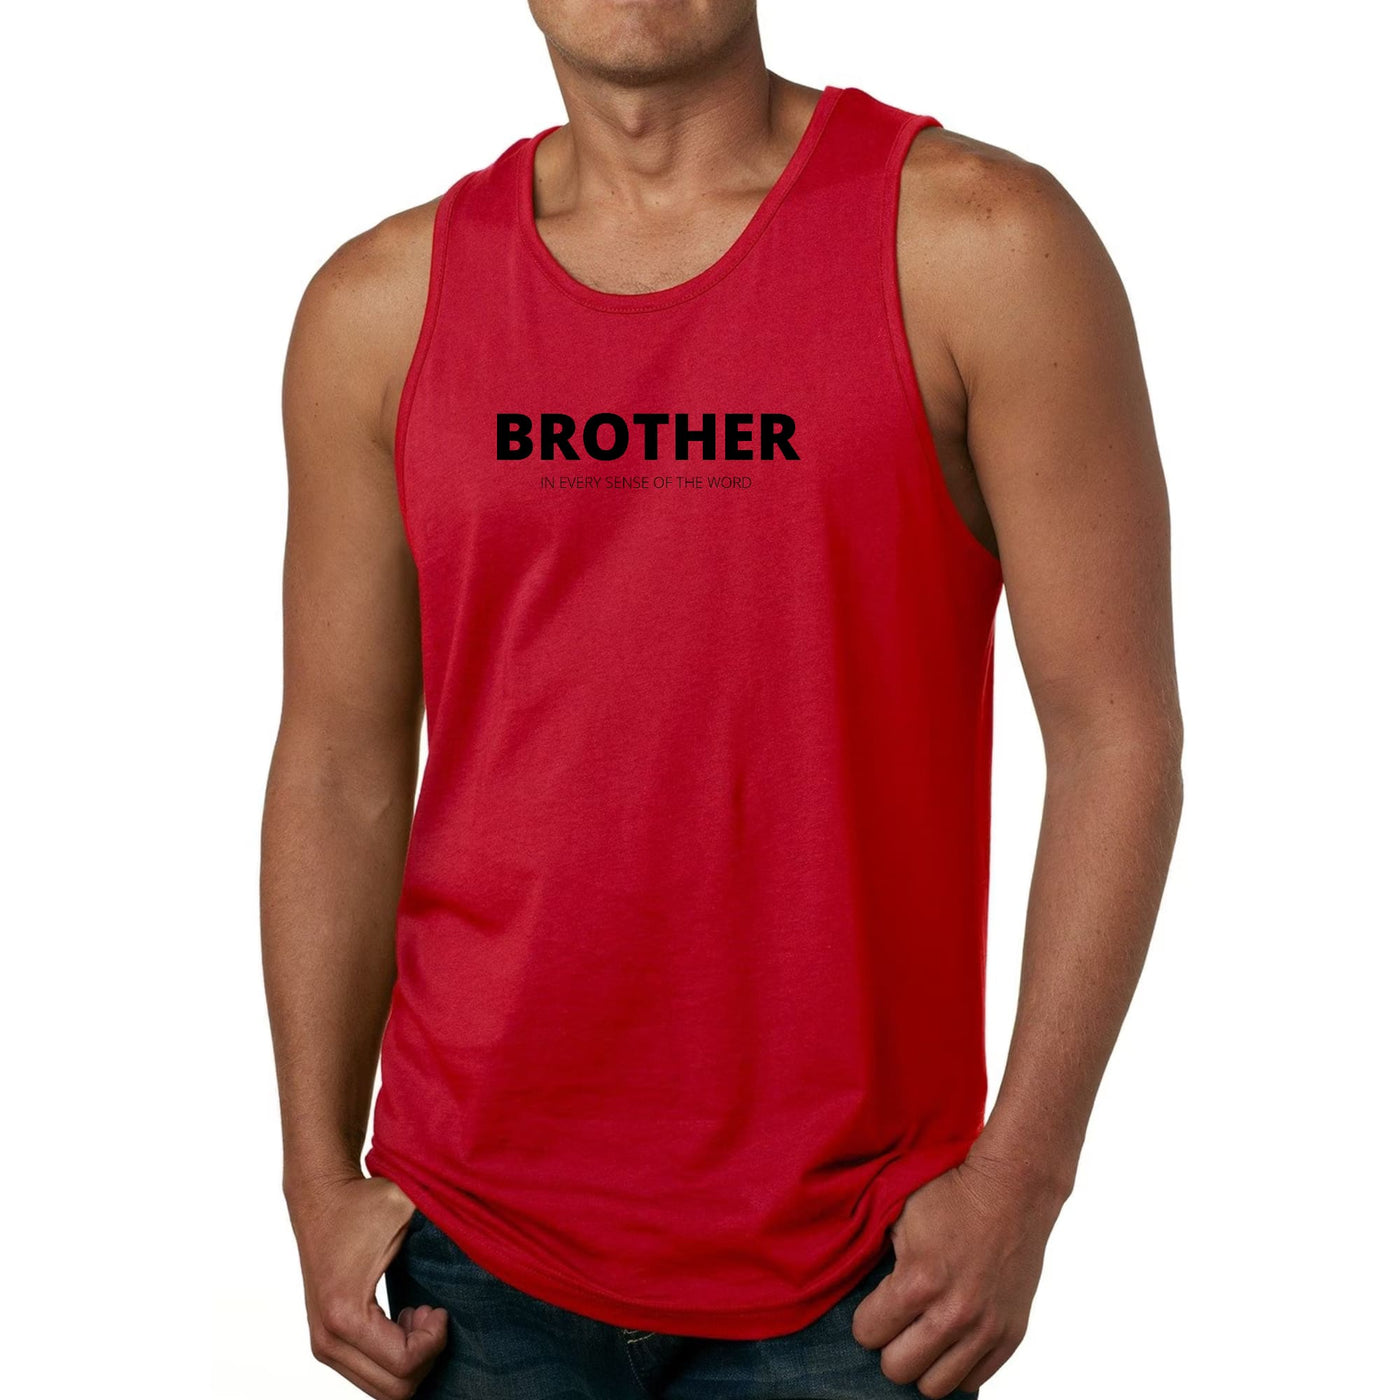 Mens Fitness Tank Top Graphic T-shirt Say It Soul Brother (in Every - Mens